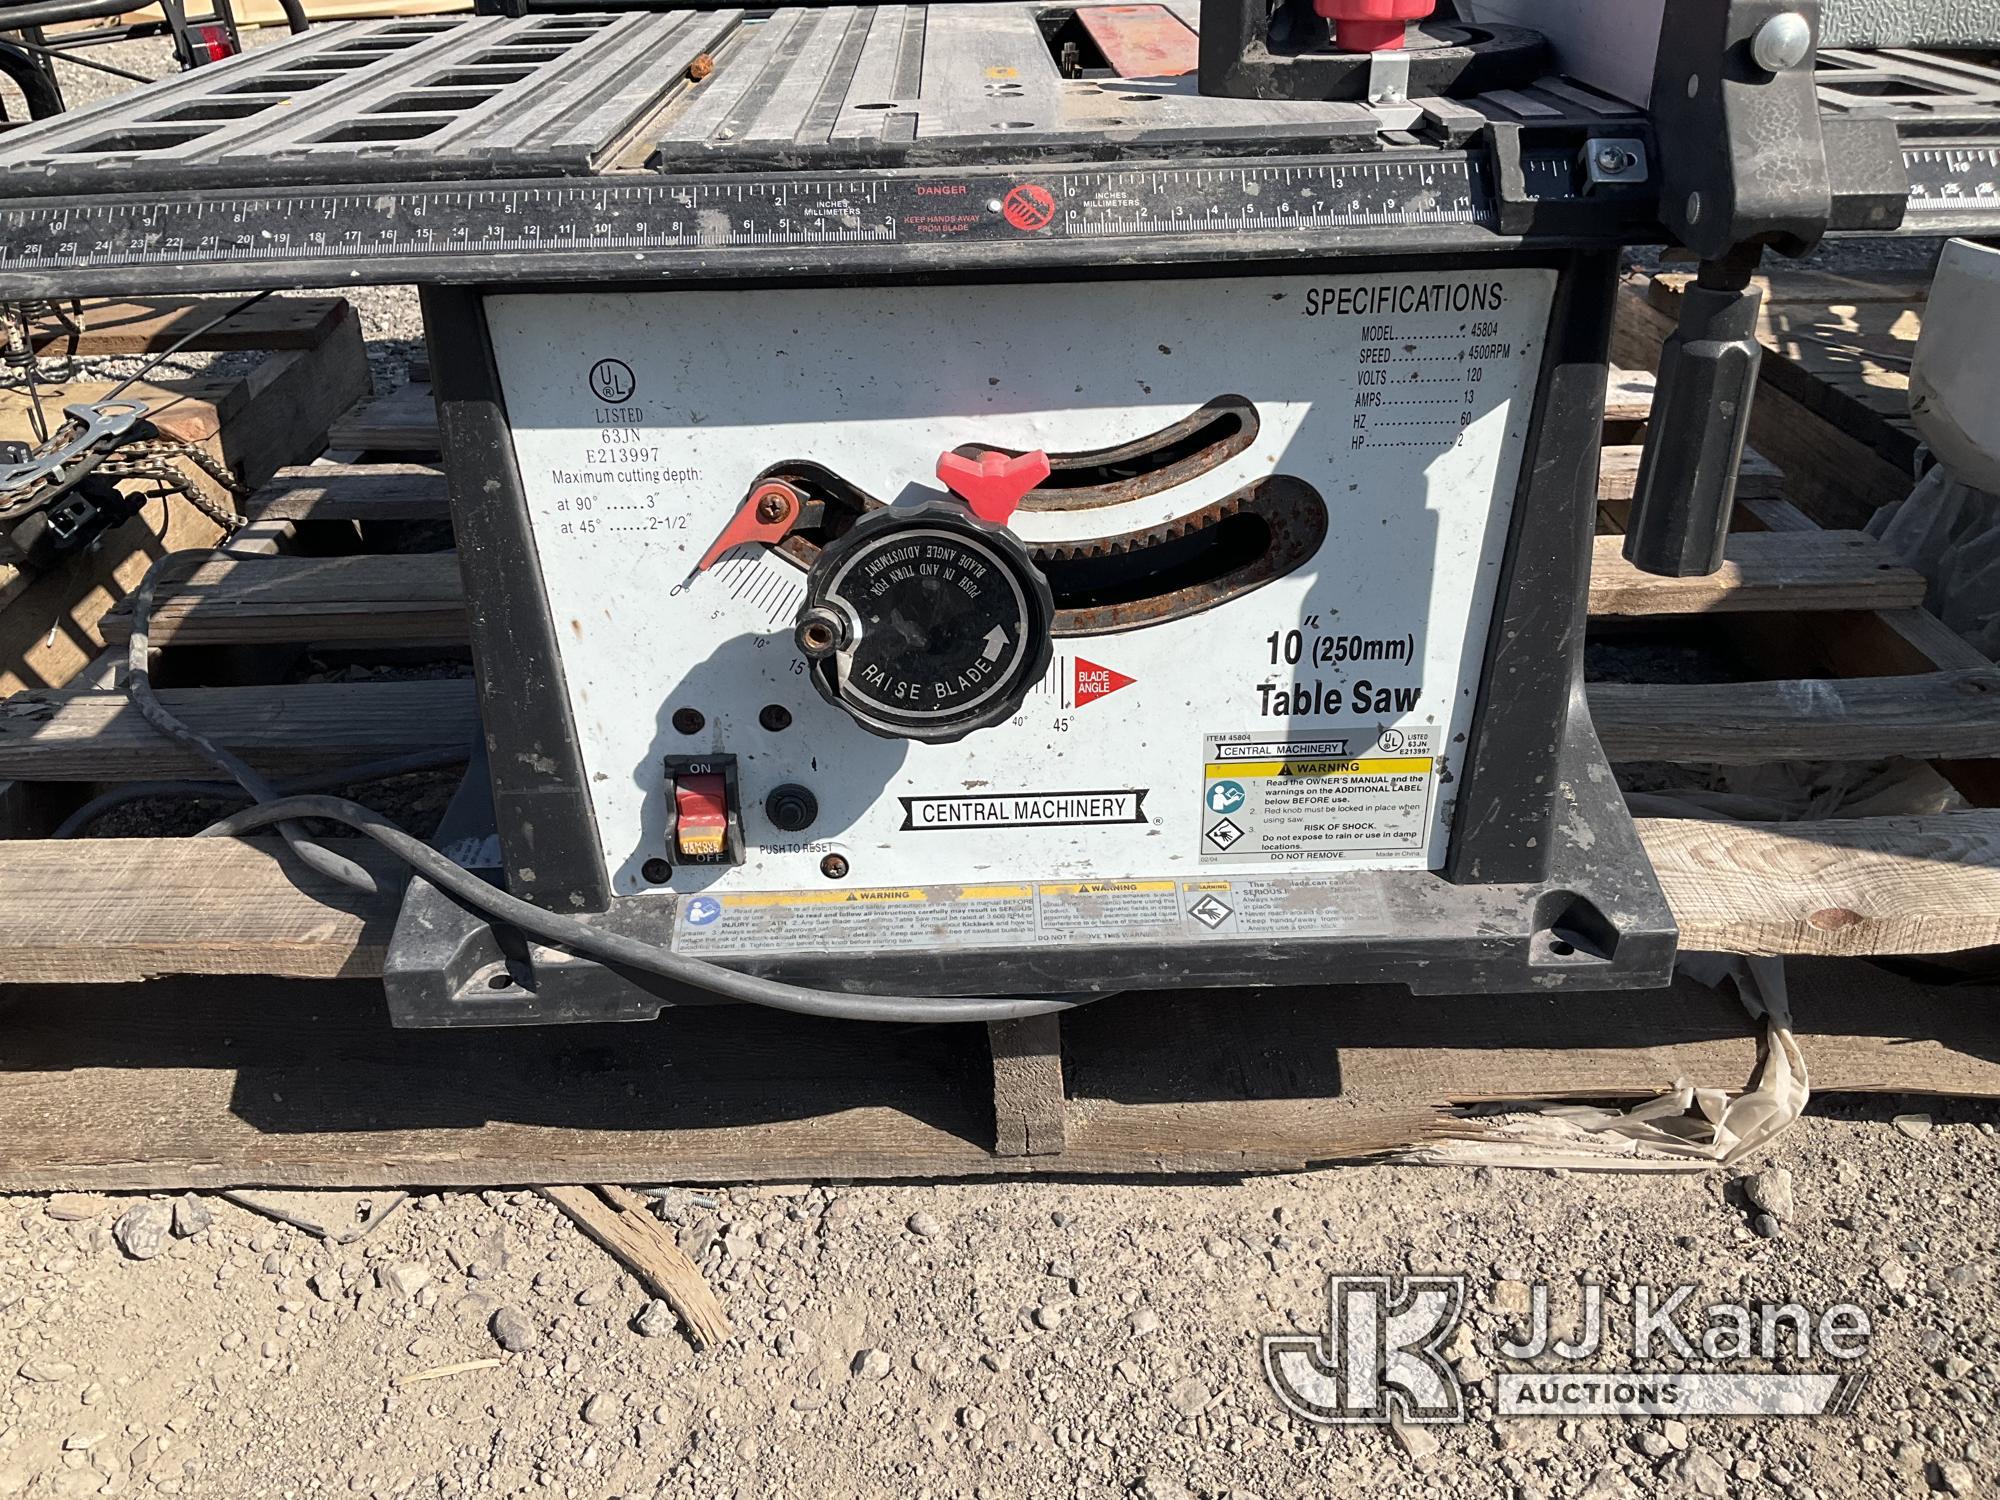 (Jurupa Valley, CA) Pallet Of Unknown Brand Of Tool Box & Table Saw (Used) NOTE: This unit is being